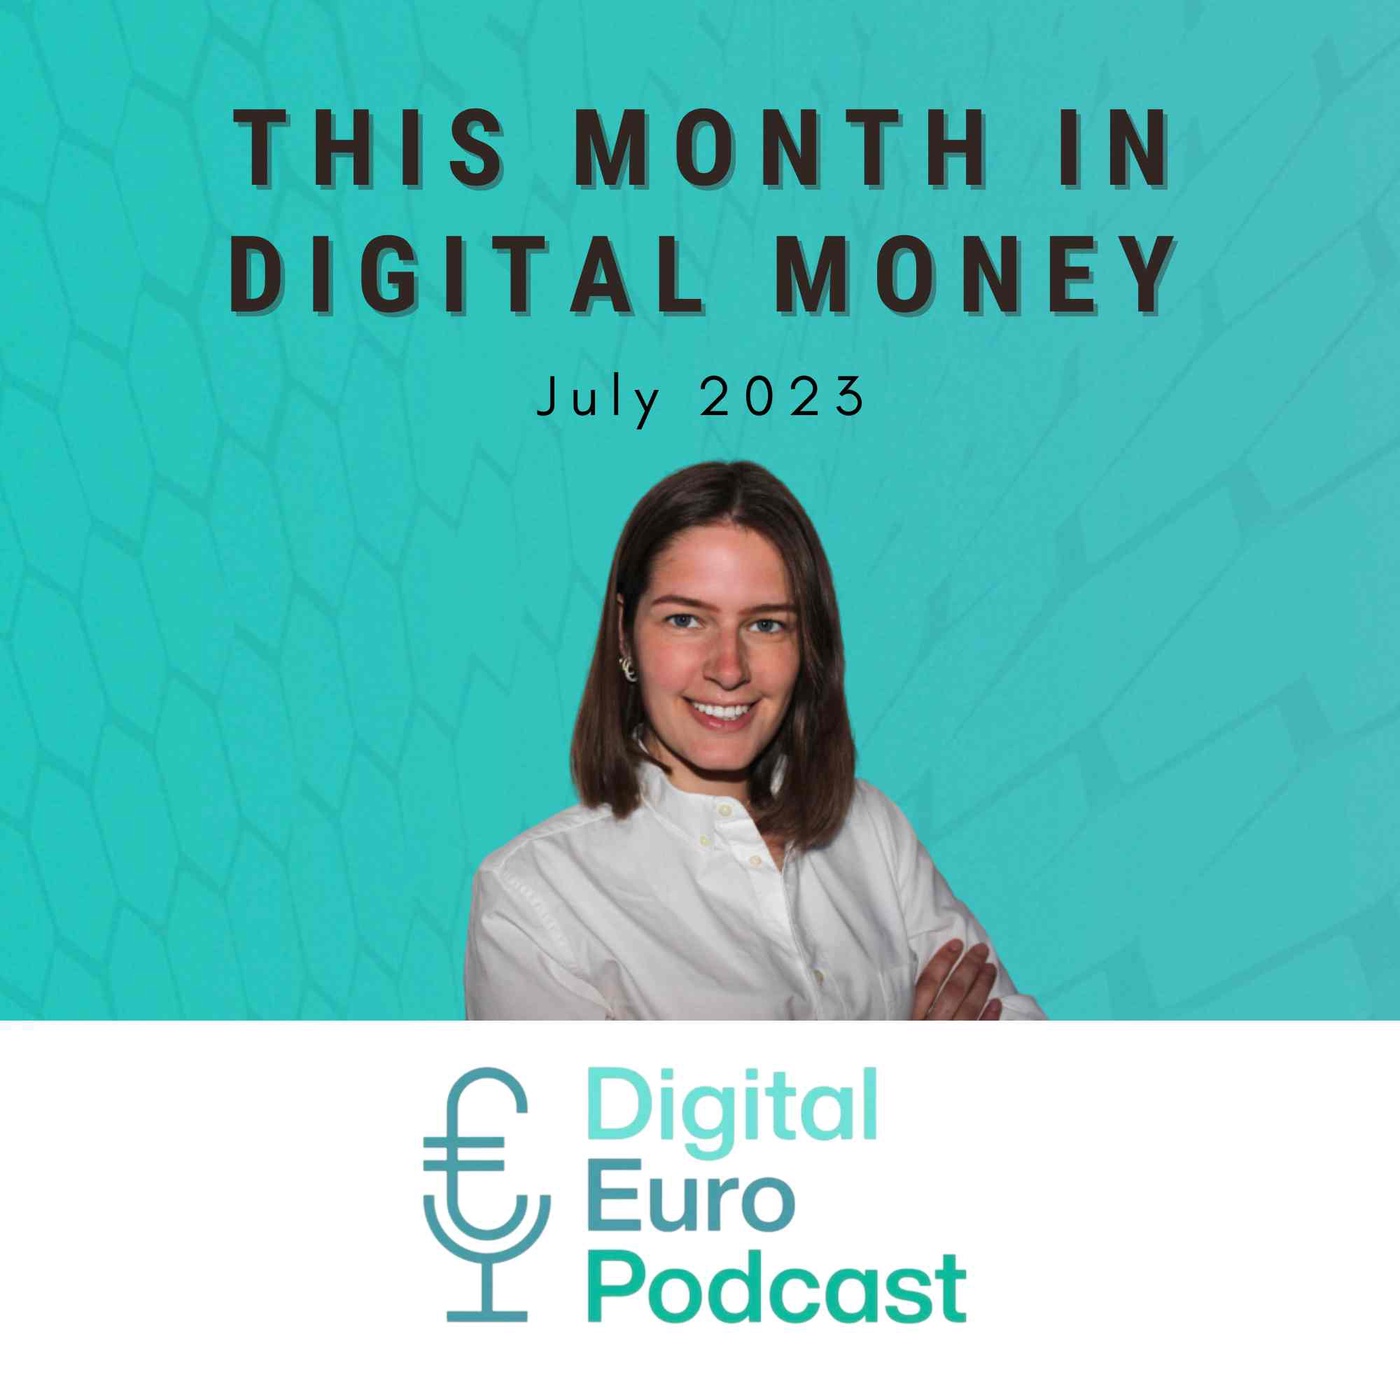 Episode 51: This Month in Digital Money – News Digest July 2023